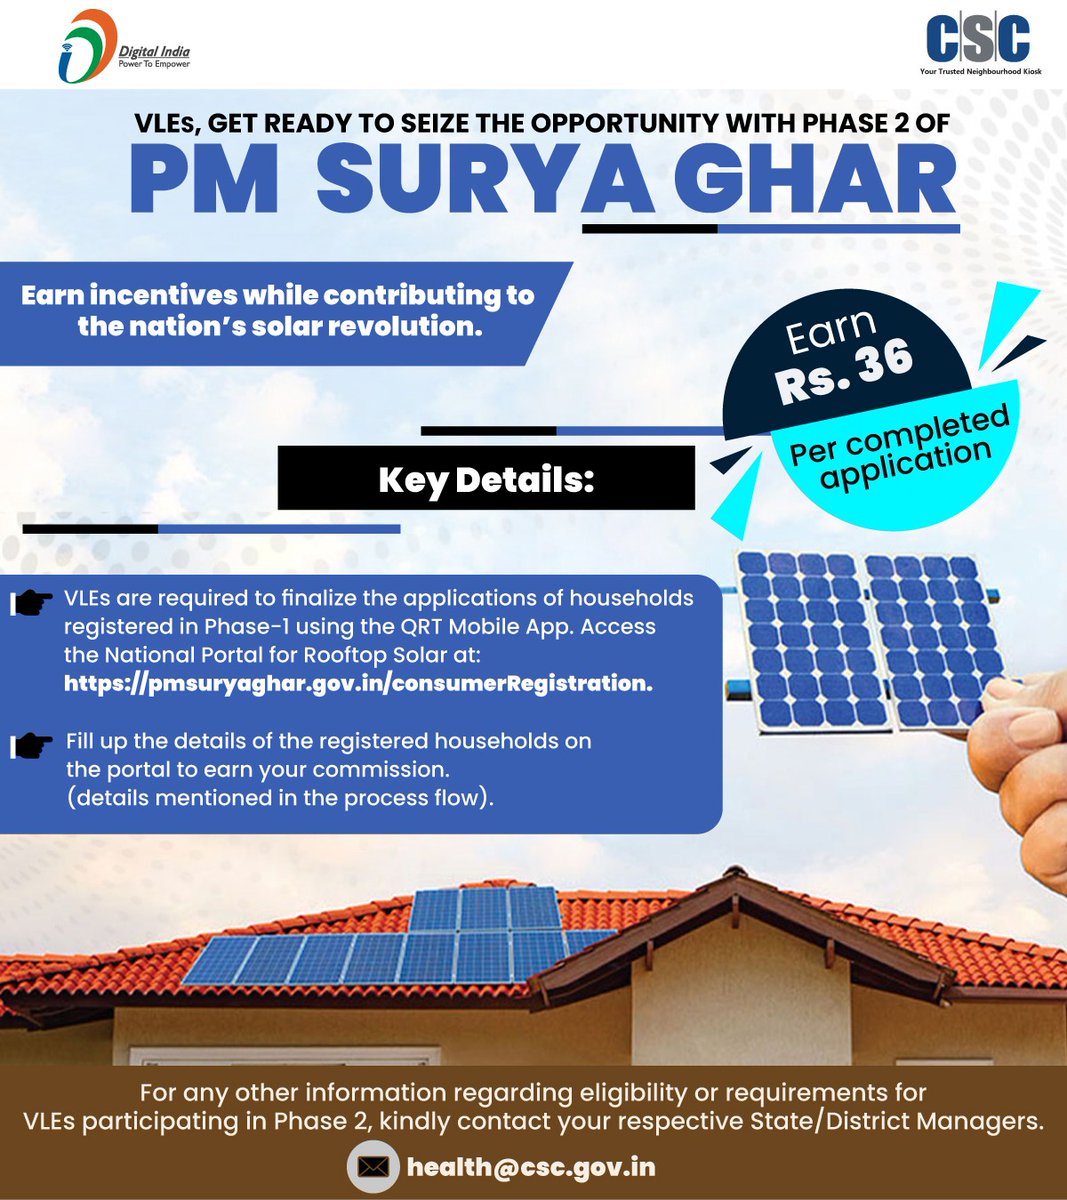 VLEs, Get ready for Phase 2 of the PM Surya Ghar Scheme! VLEs are required to finalize the applications of households registered in Phase-1 using the QRT Mobile App. Access the National Portal for Rooftop Solar at: pmsuryaghar.gov.in/consumerRegist… Earn Rs.36 per completed application...